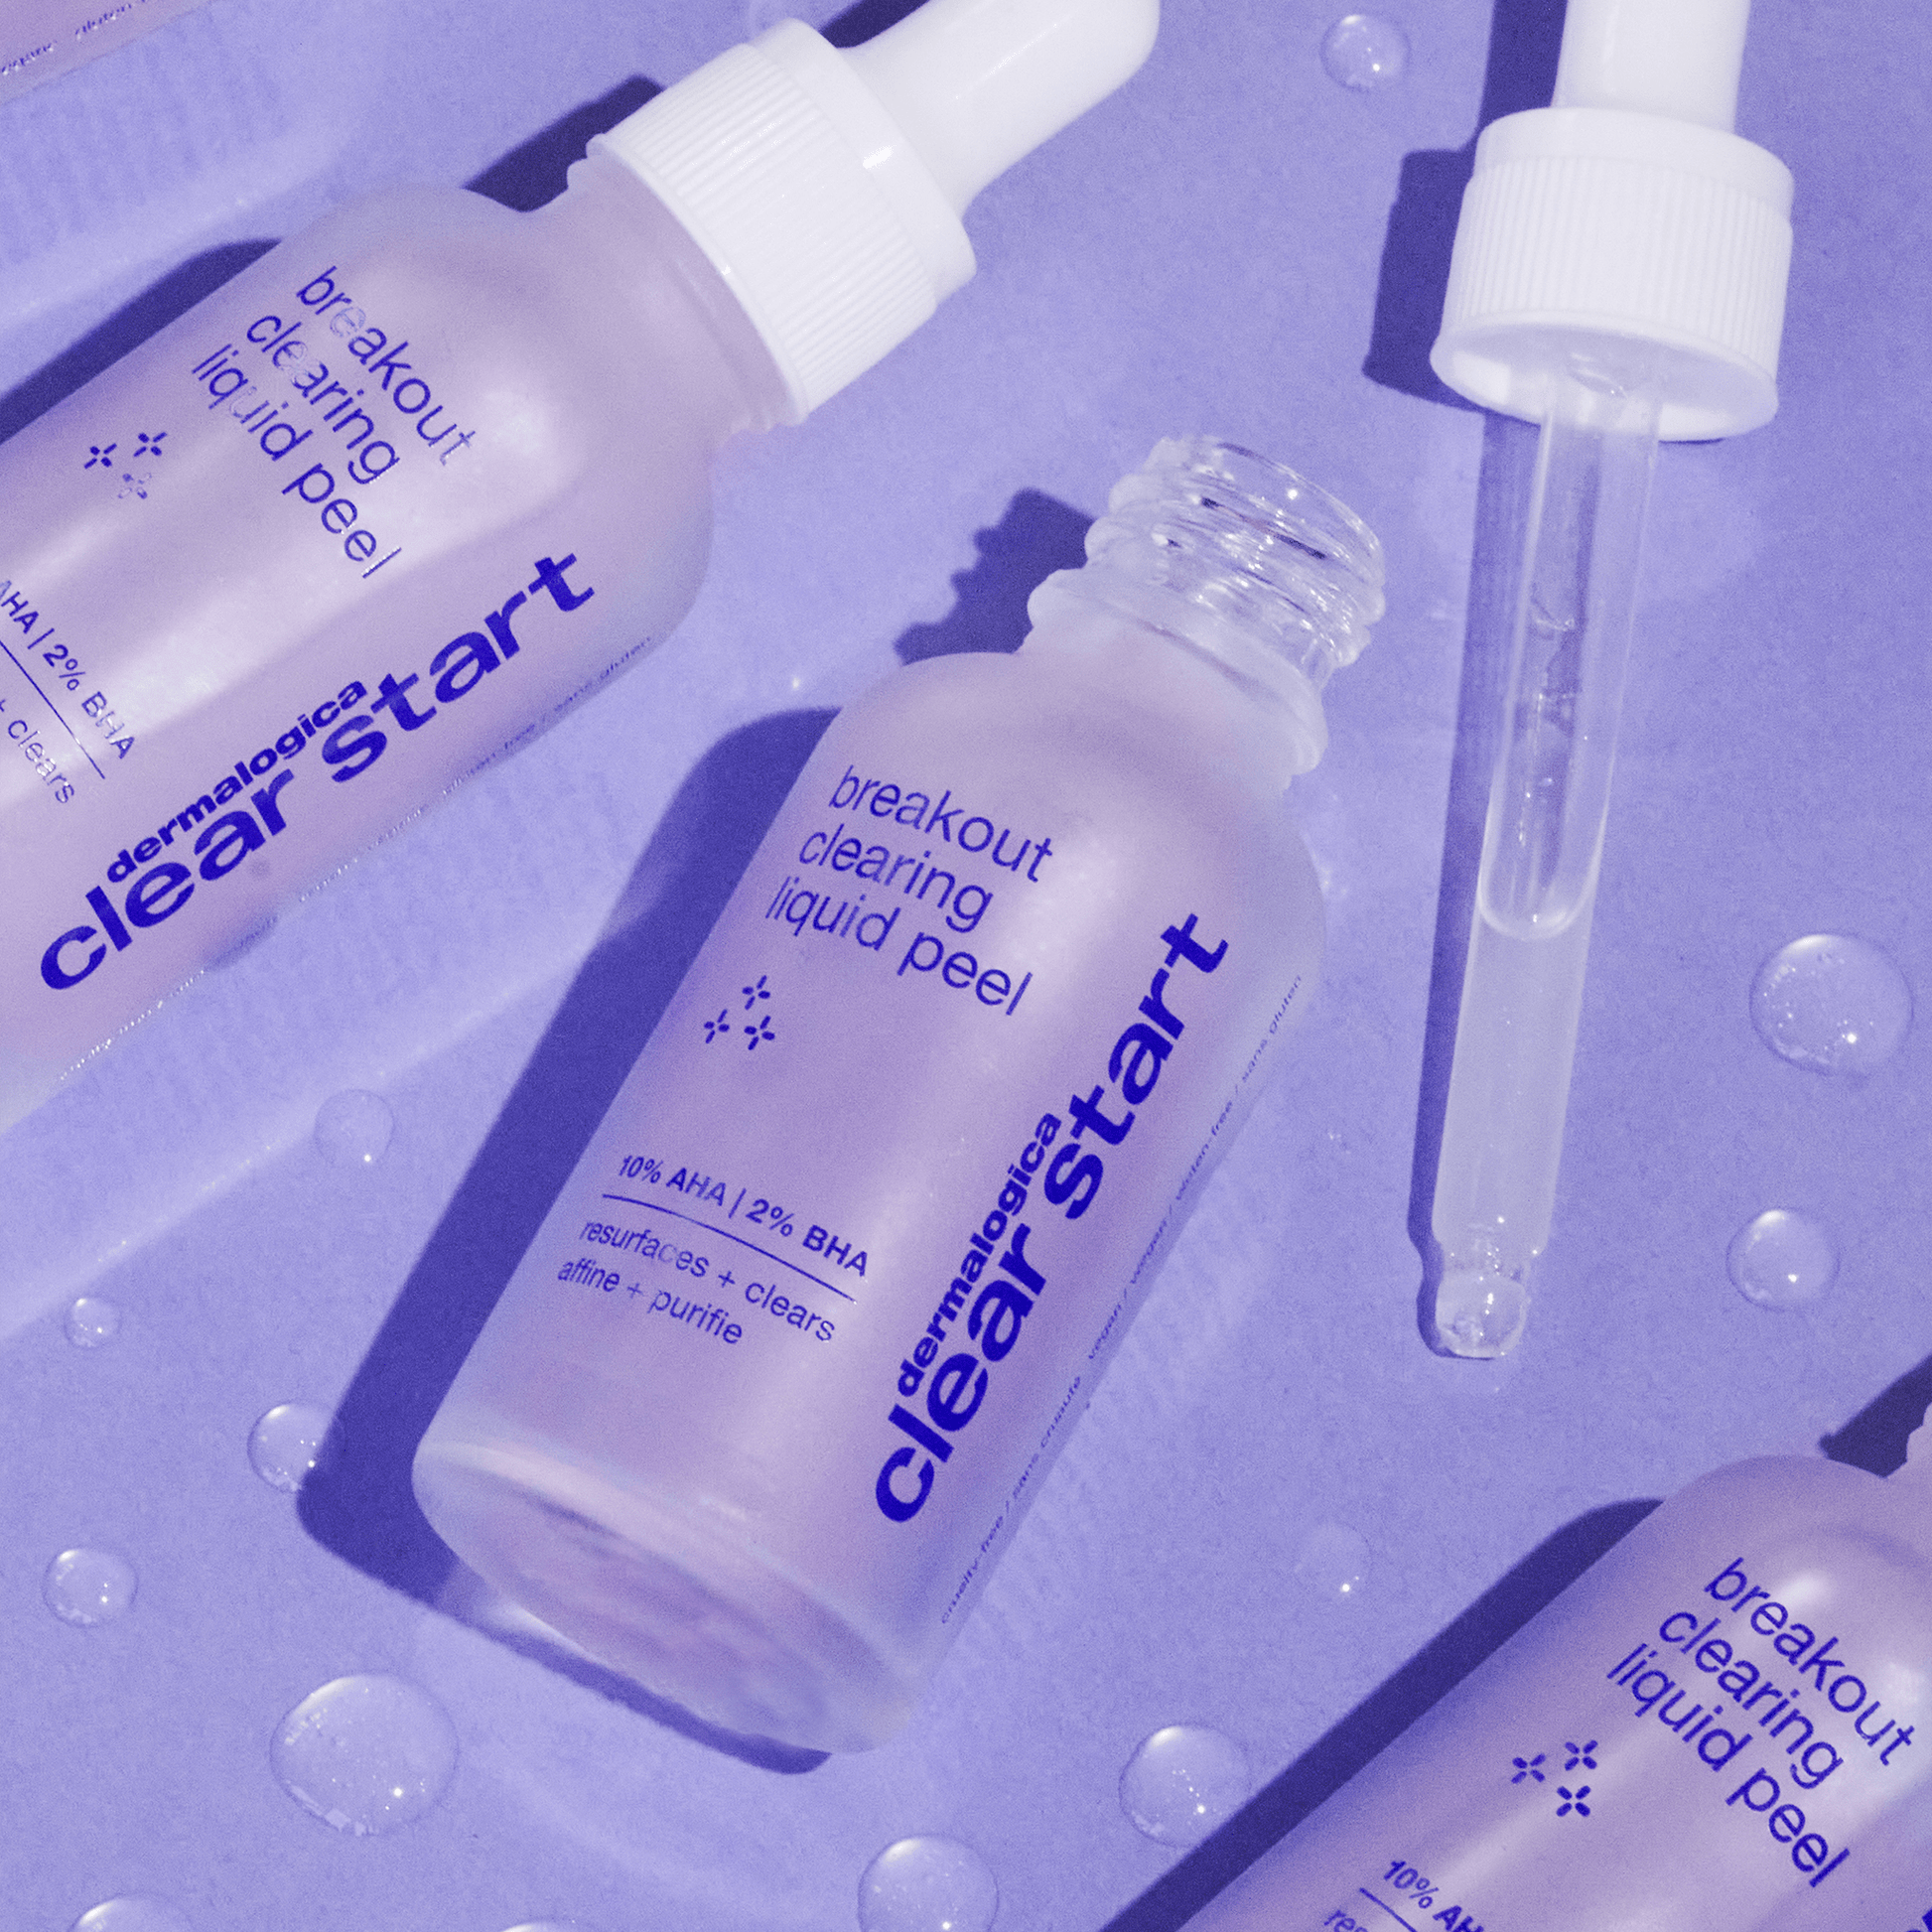 Breakout Clearing Liquid Peel bottles and droplets